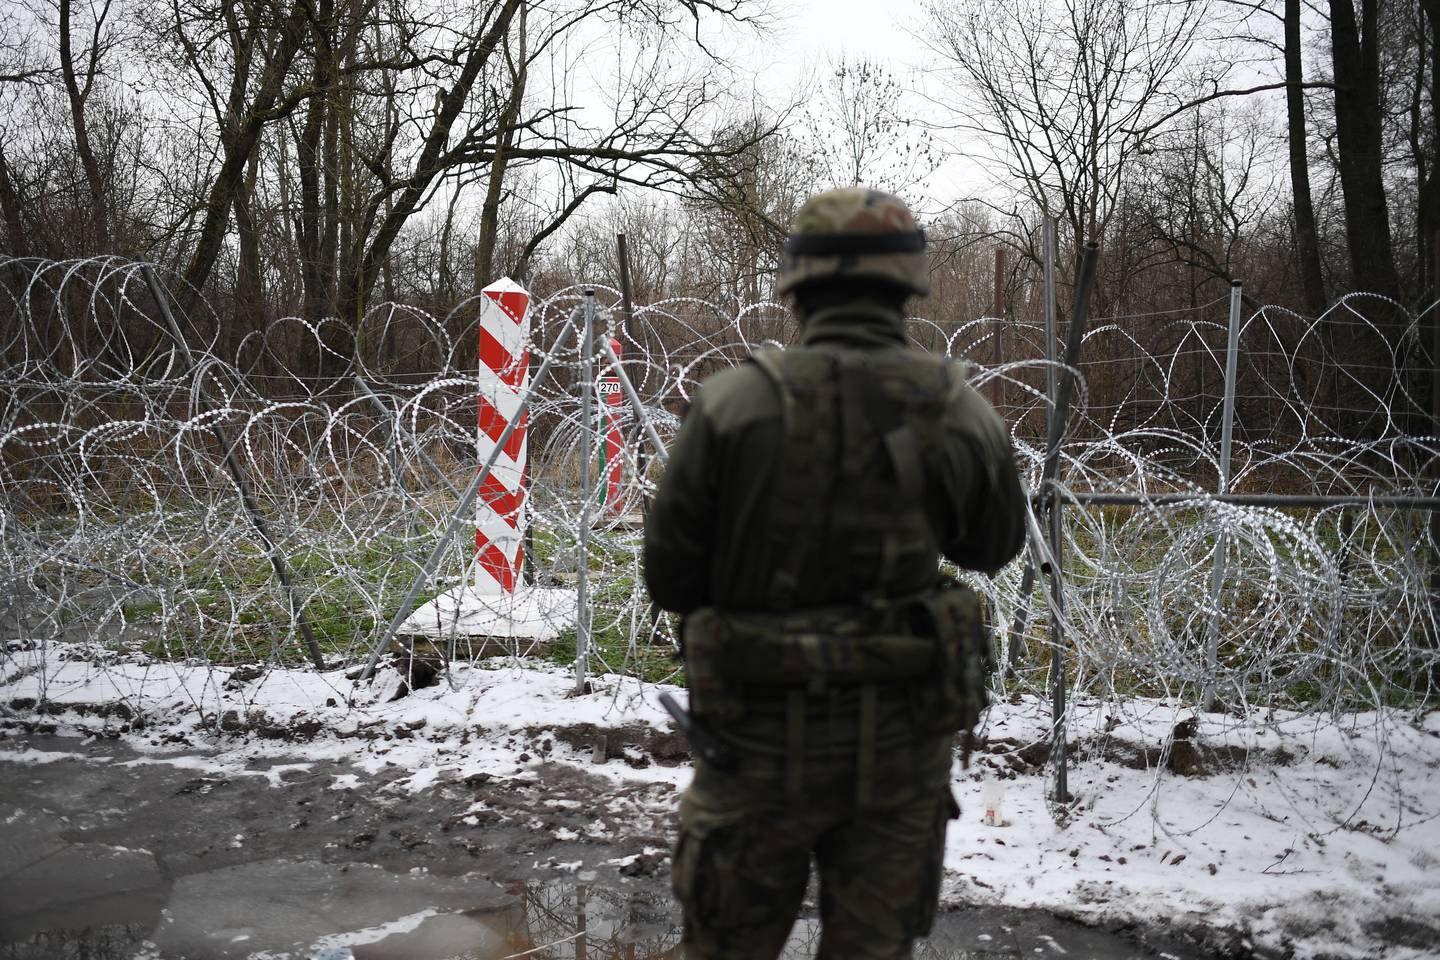 A Polish soldier at the border with Belarus, where at least 13 people are thought to have died since the crisis erupted. EPA 